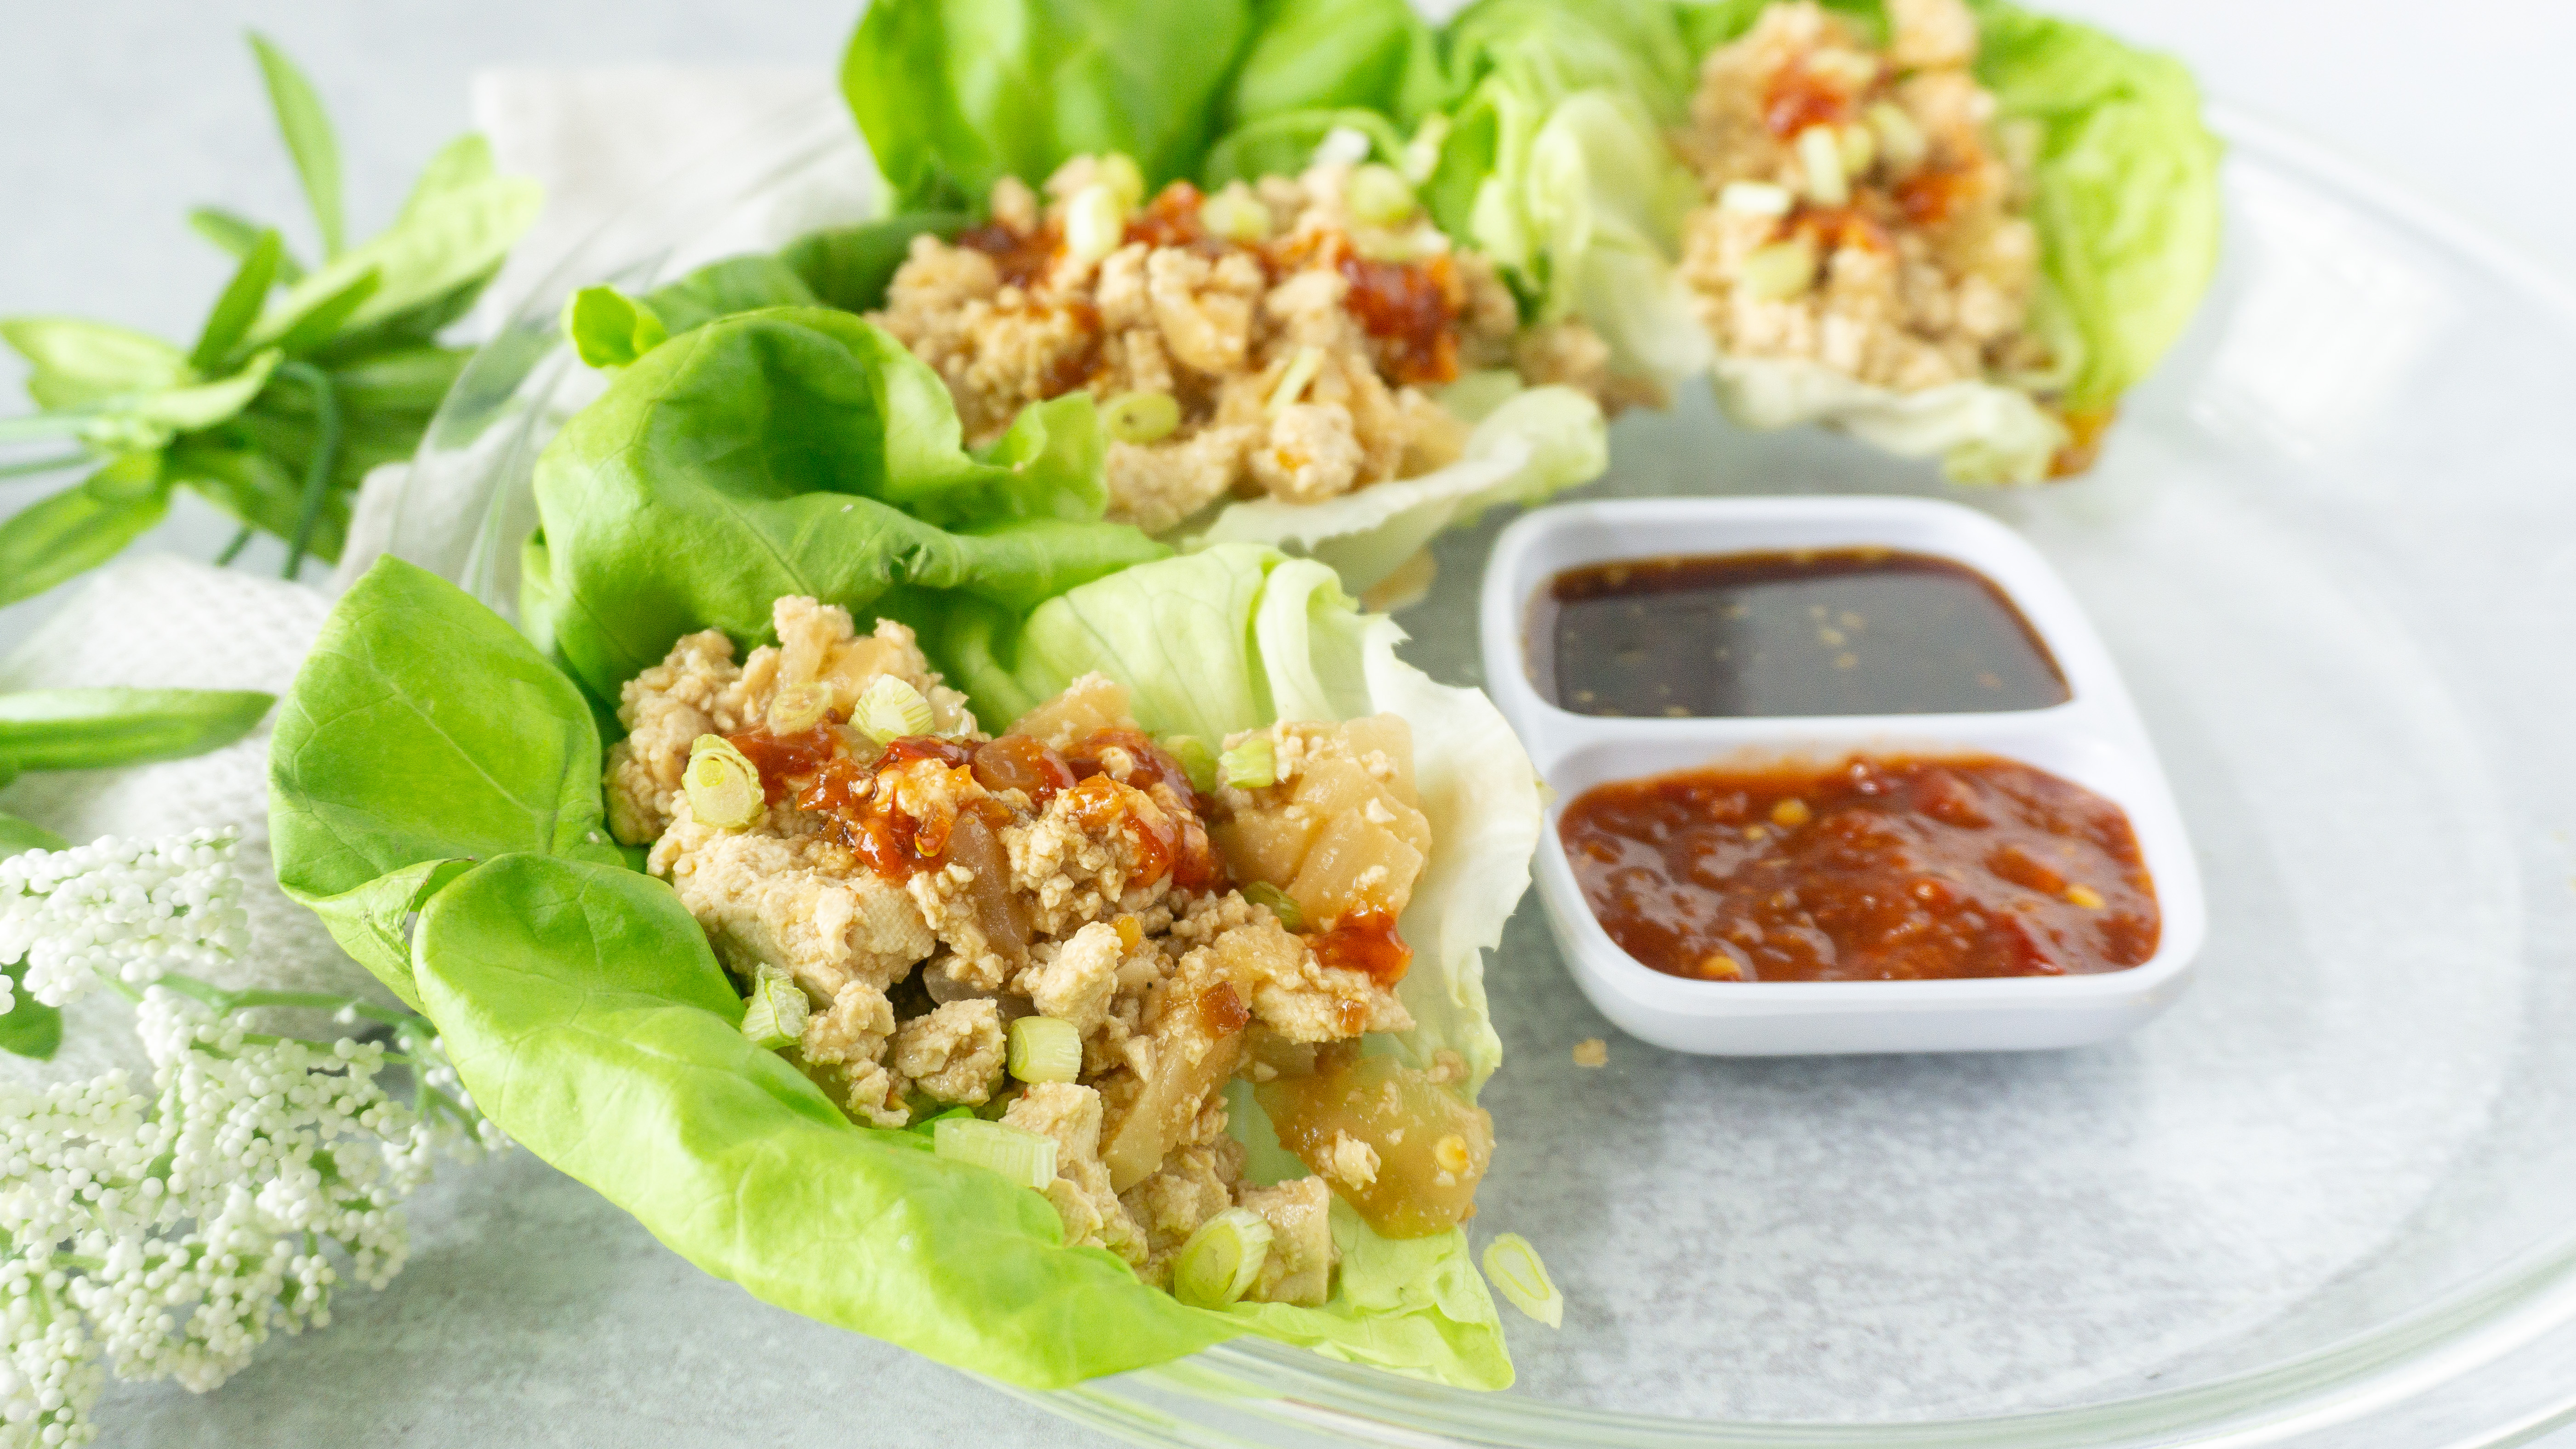 tofu lettuce wraps served on a plate with sauces on the side